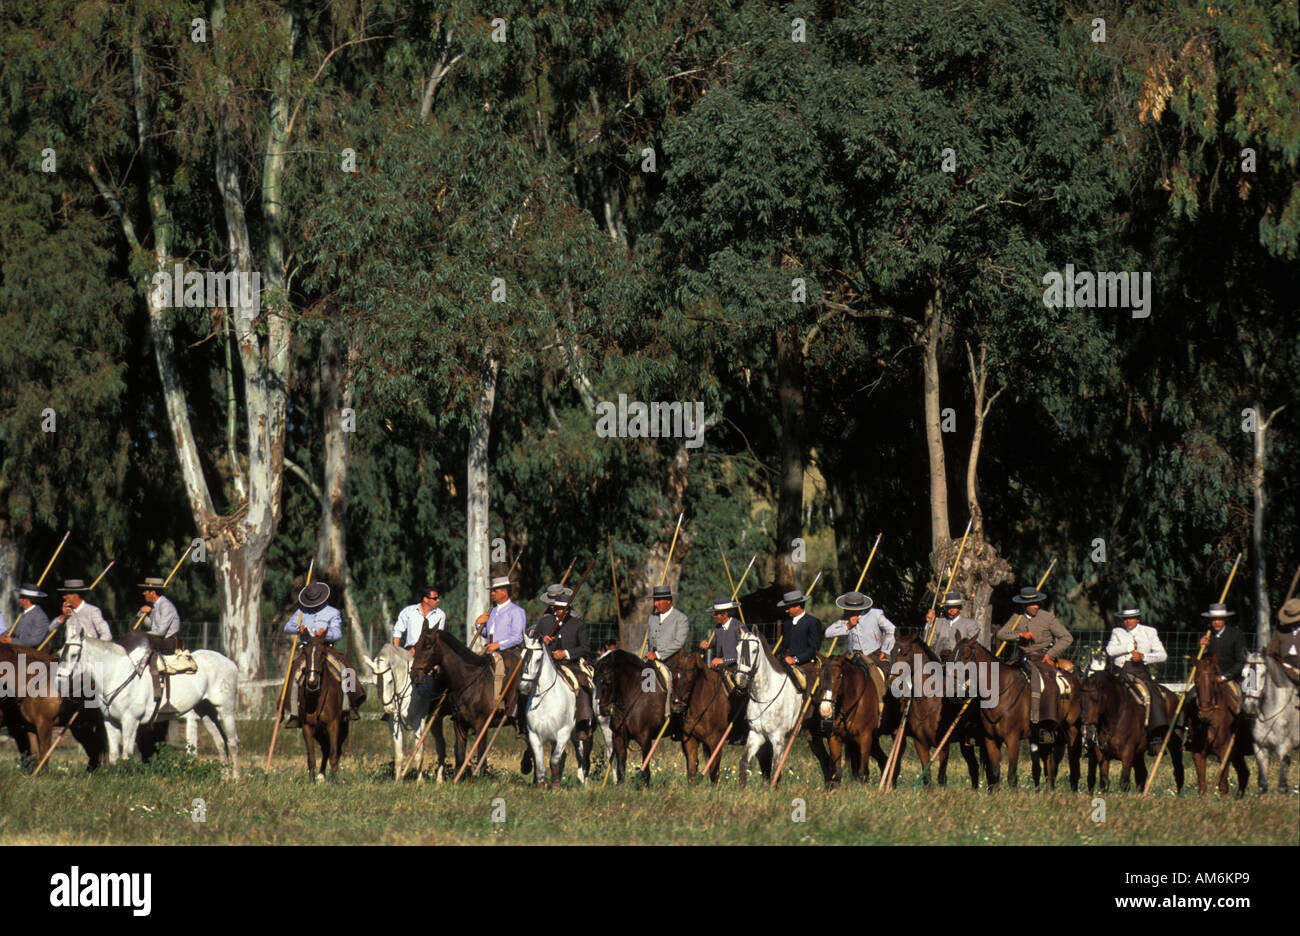 Medina Sidonia cowboys waiting in line for the Andalusian championship of Acoso y Deribo Stock Photo